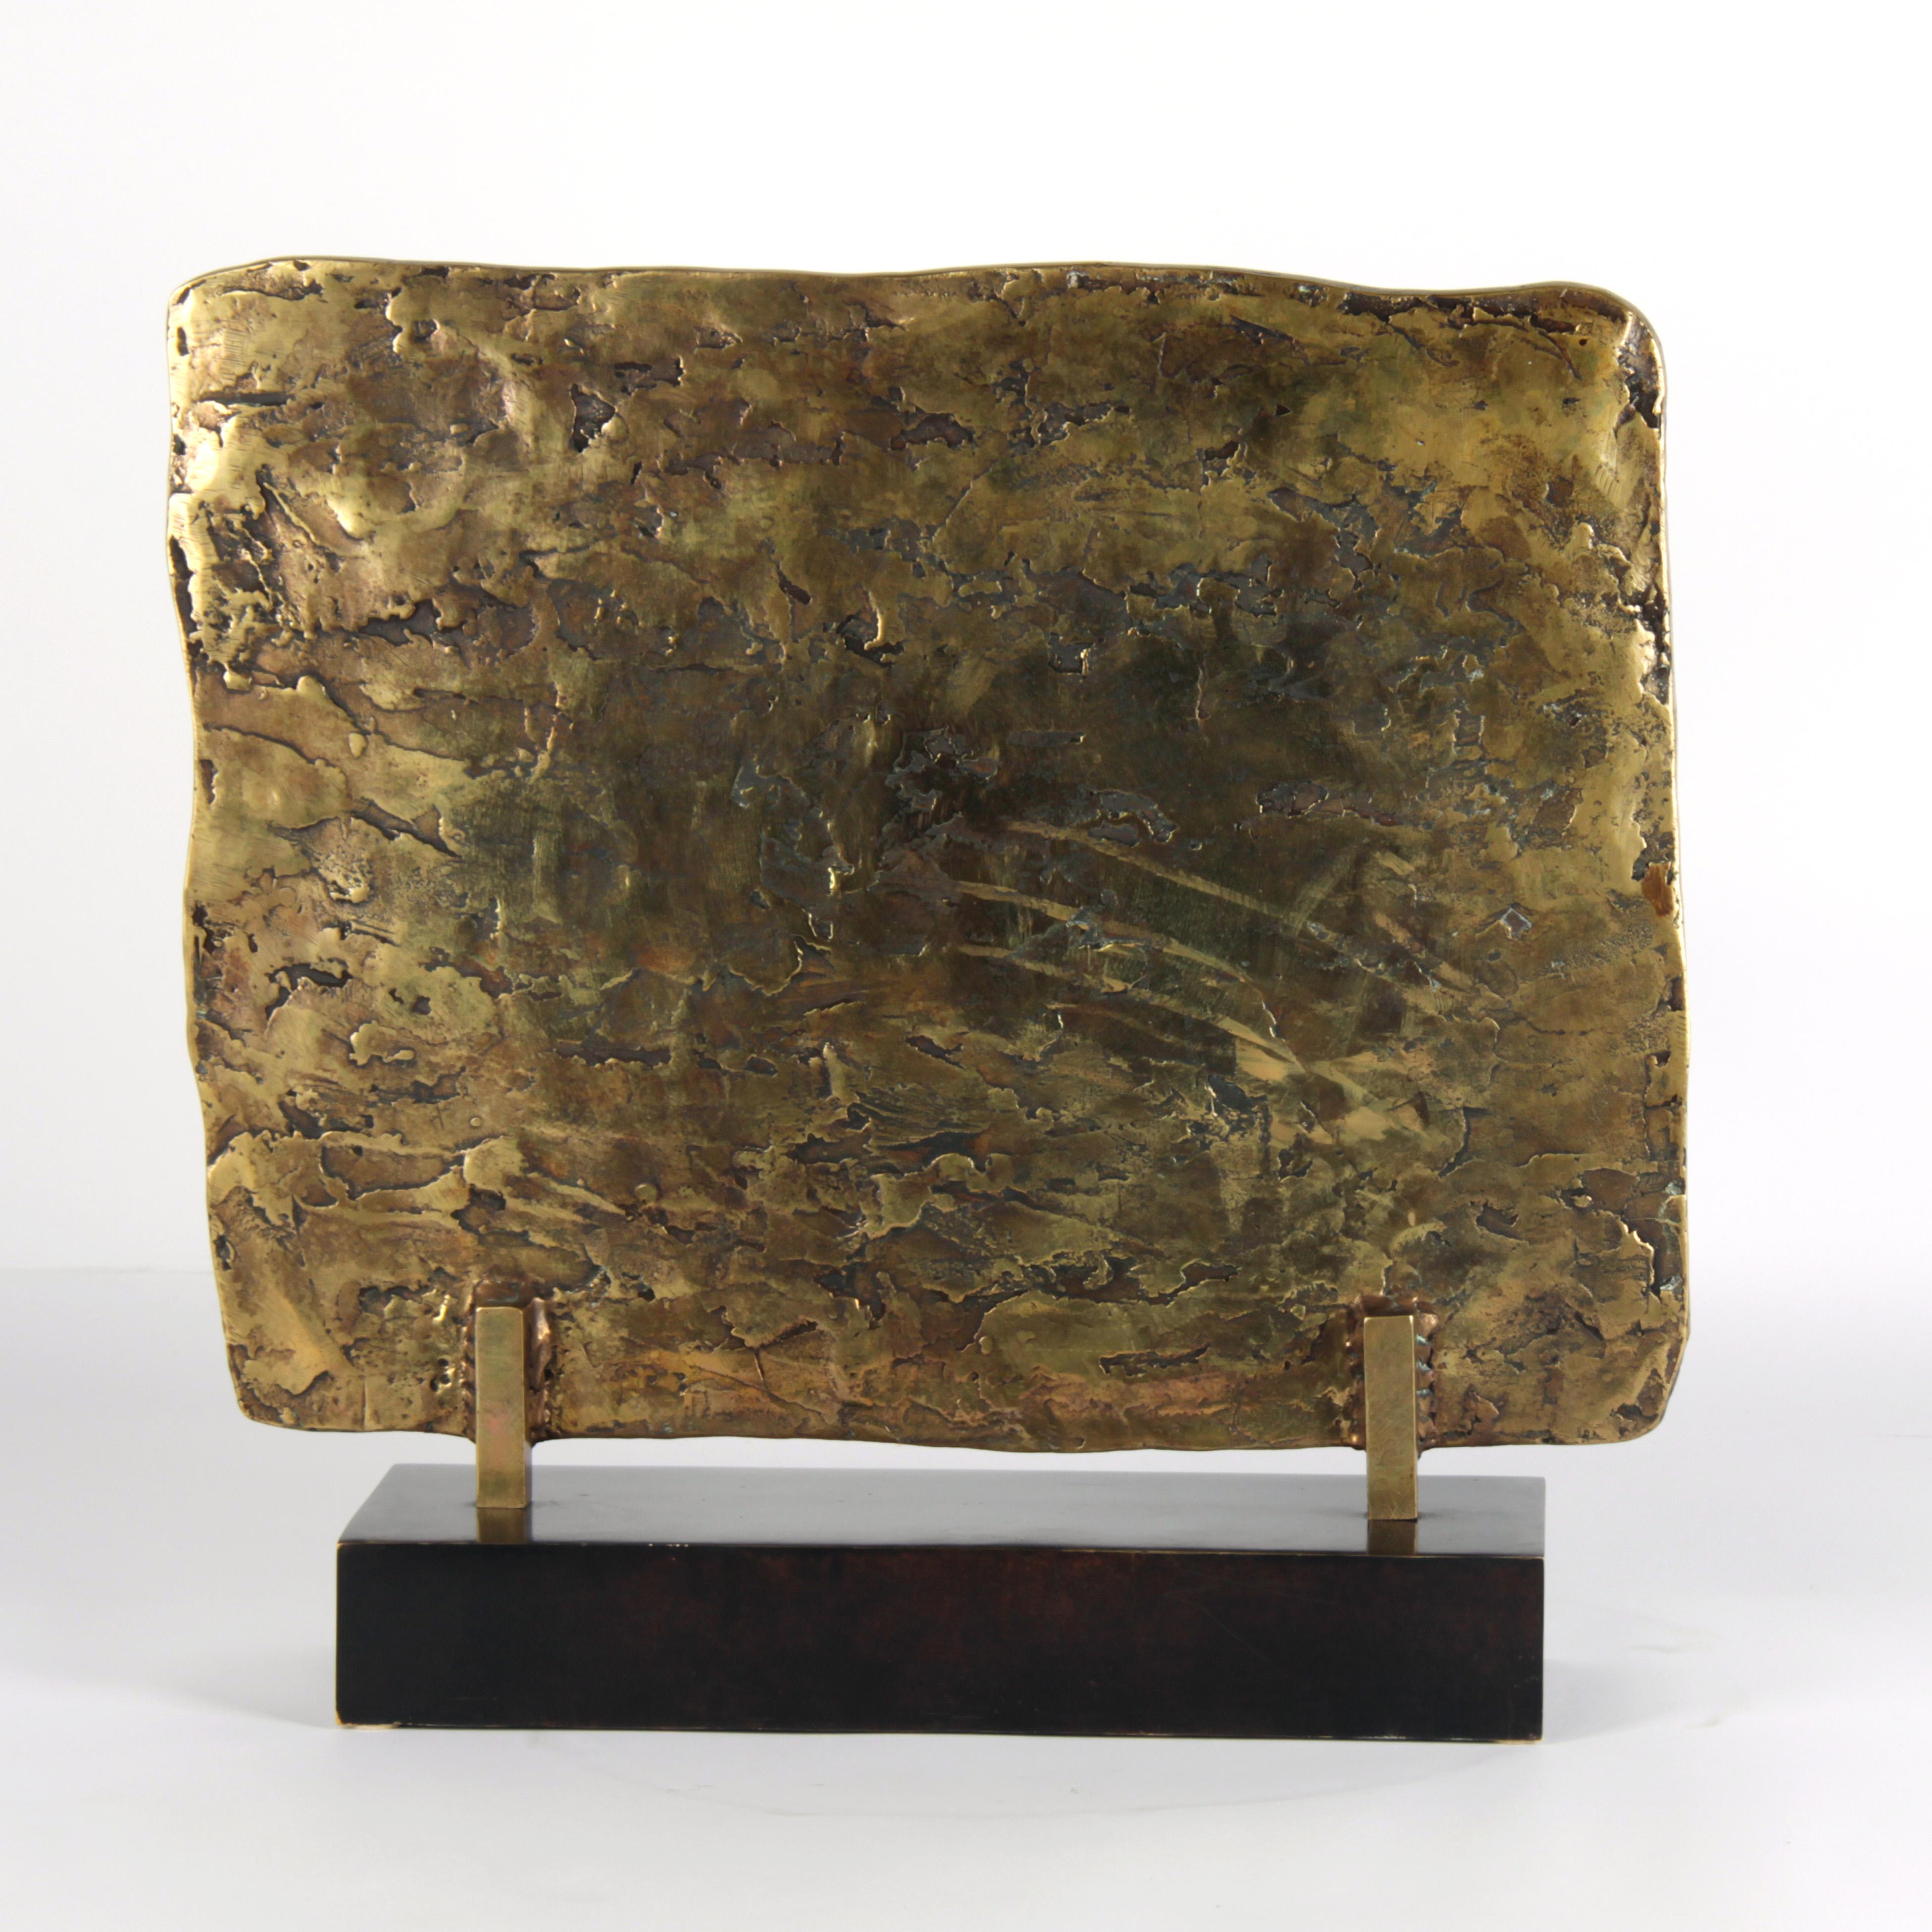 French 20th Century Bronze Plaquette Signed by Georges Braque